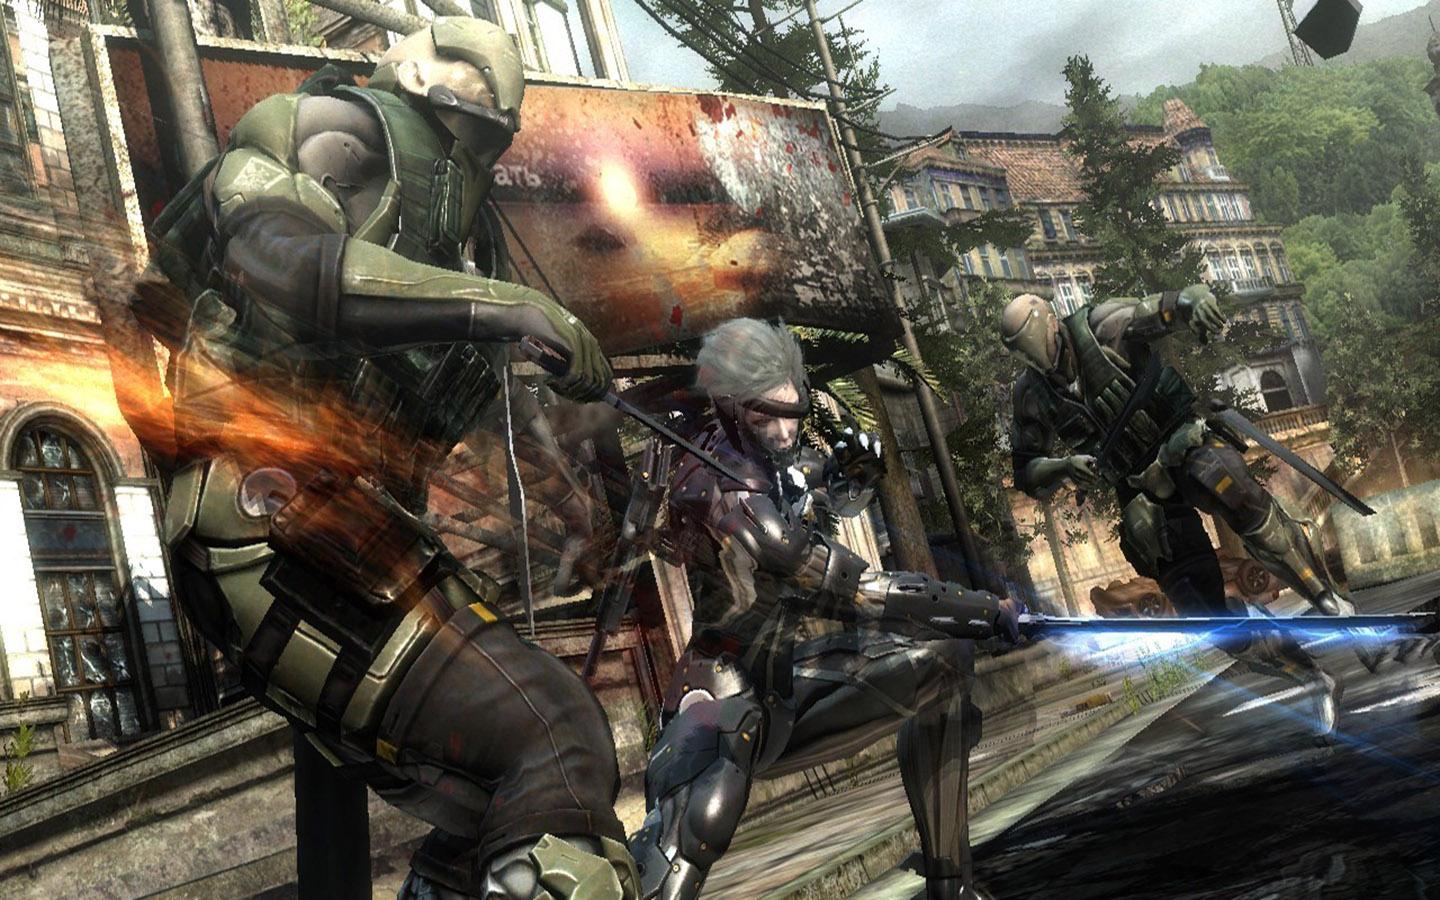 Metal Gear Rising is now available on Xbox One via backwards compatibility